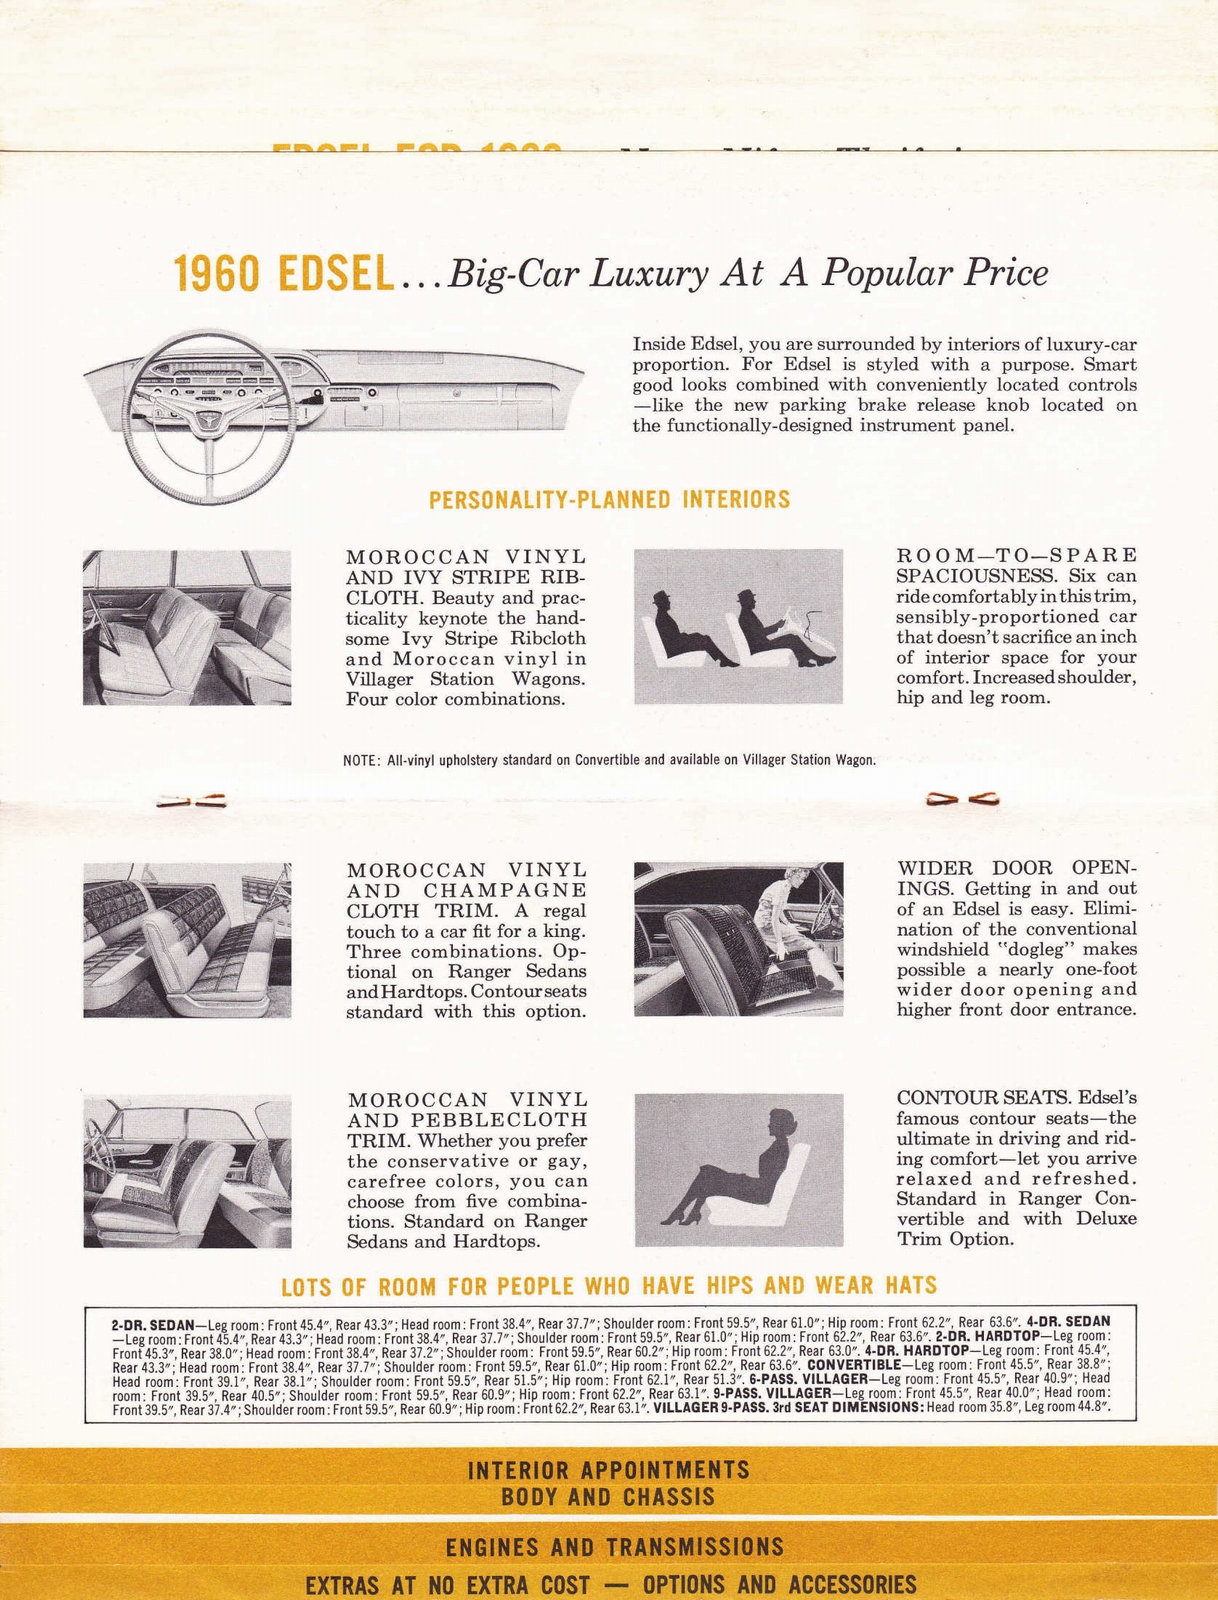 n_1960 Edsel Quick Facts Booklet-08-09.jpg